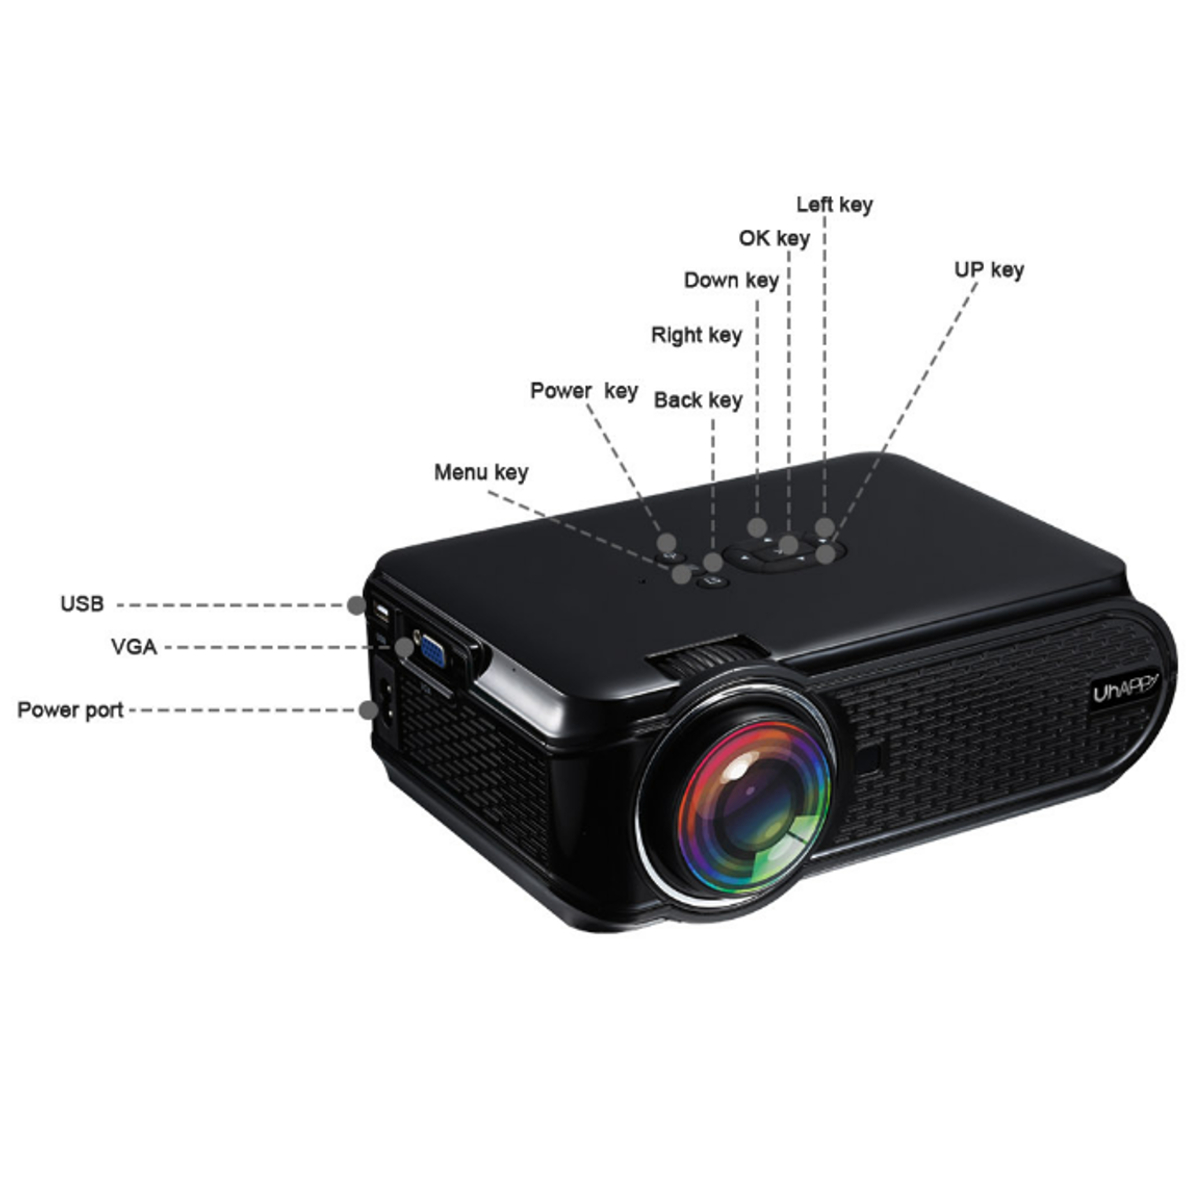 UHAPPY U90 Black Android 6.0 2000 Lumens LED WiFi bluetooth 4.0 Projector 800 x 480 Support 1080p 15